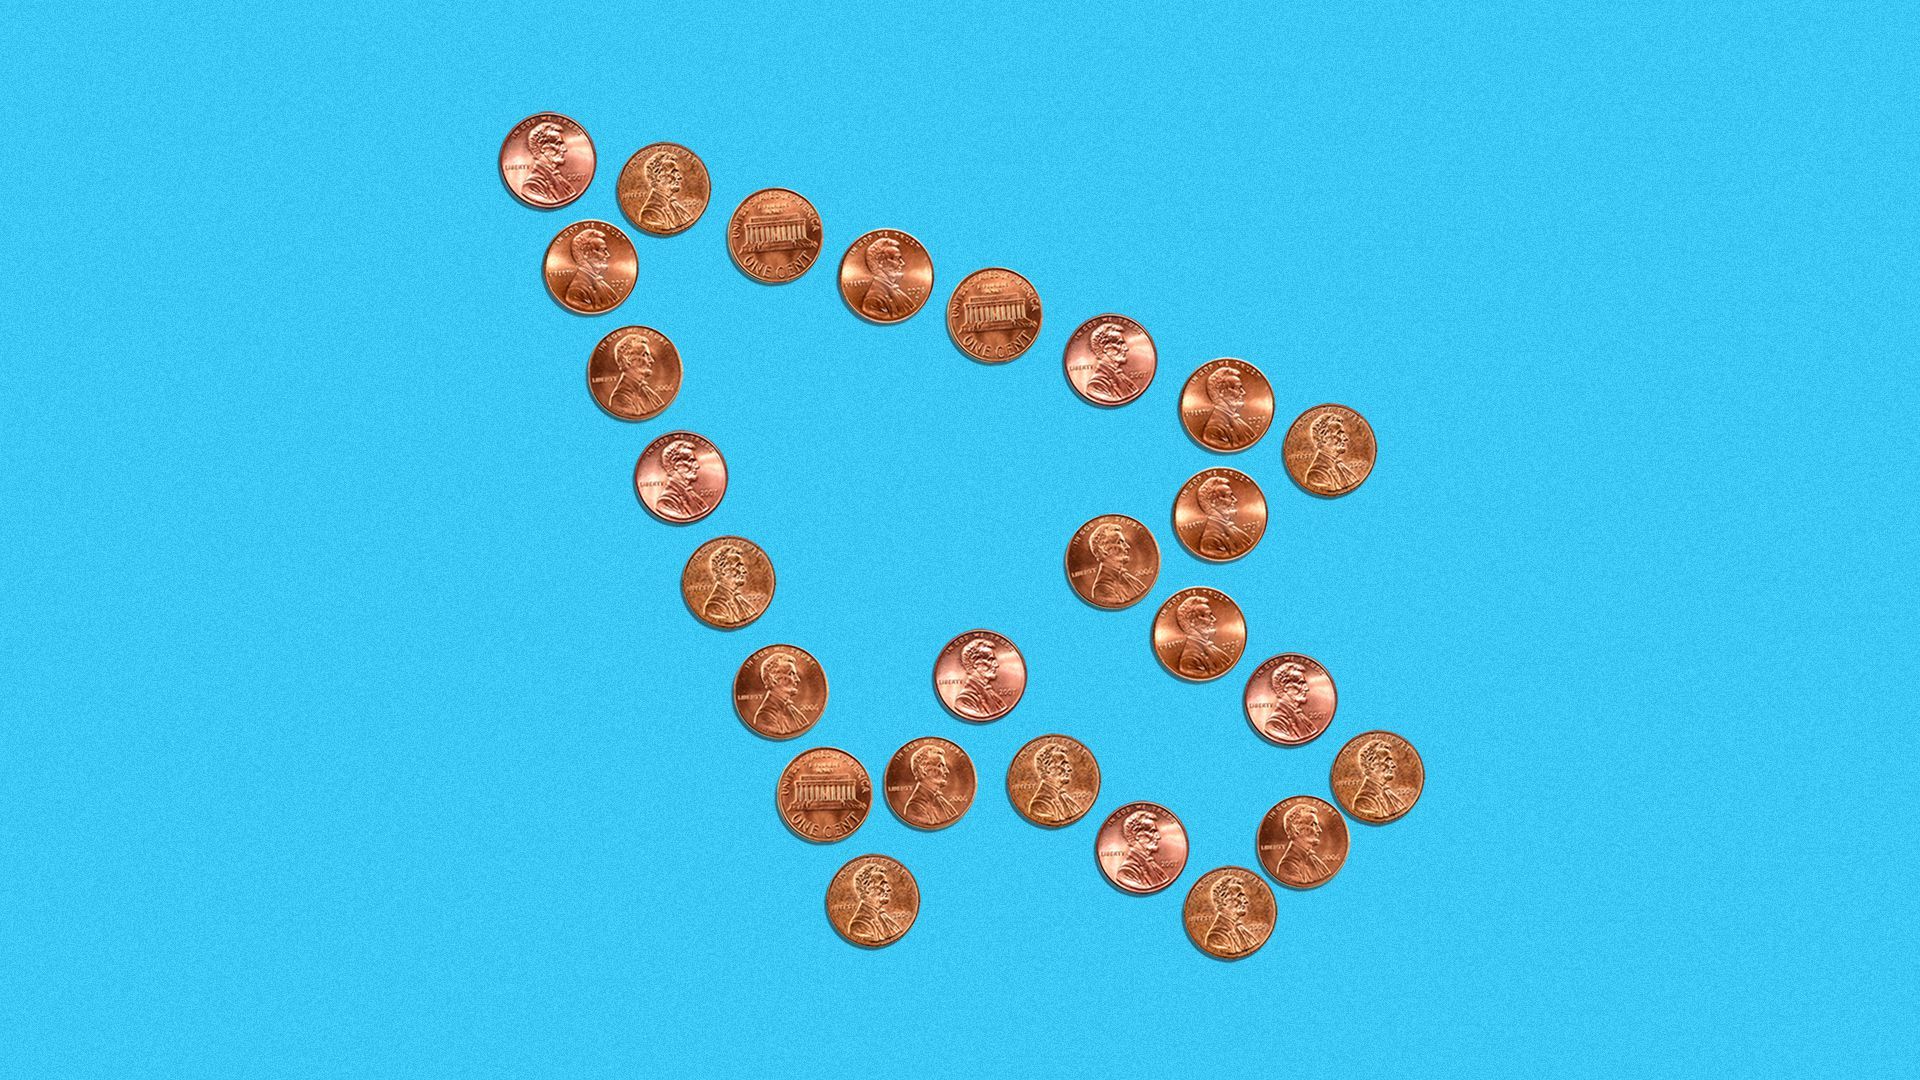 Illustration of a mouse cursor formed by small pennies